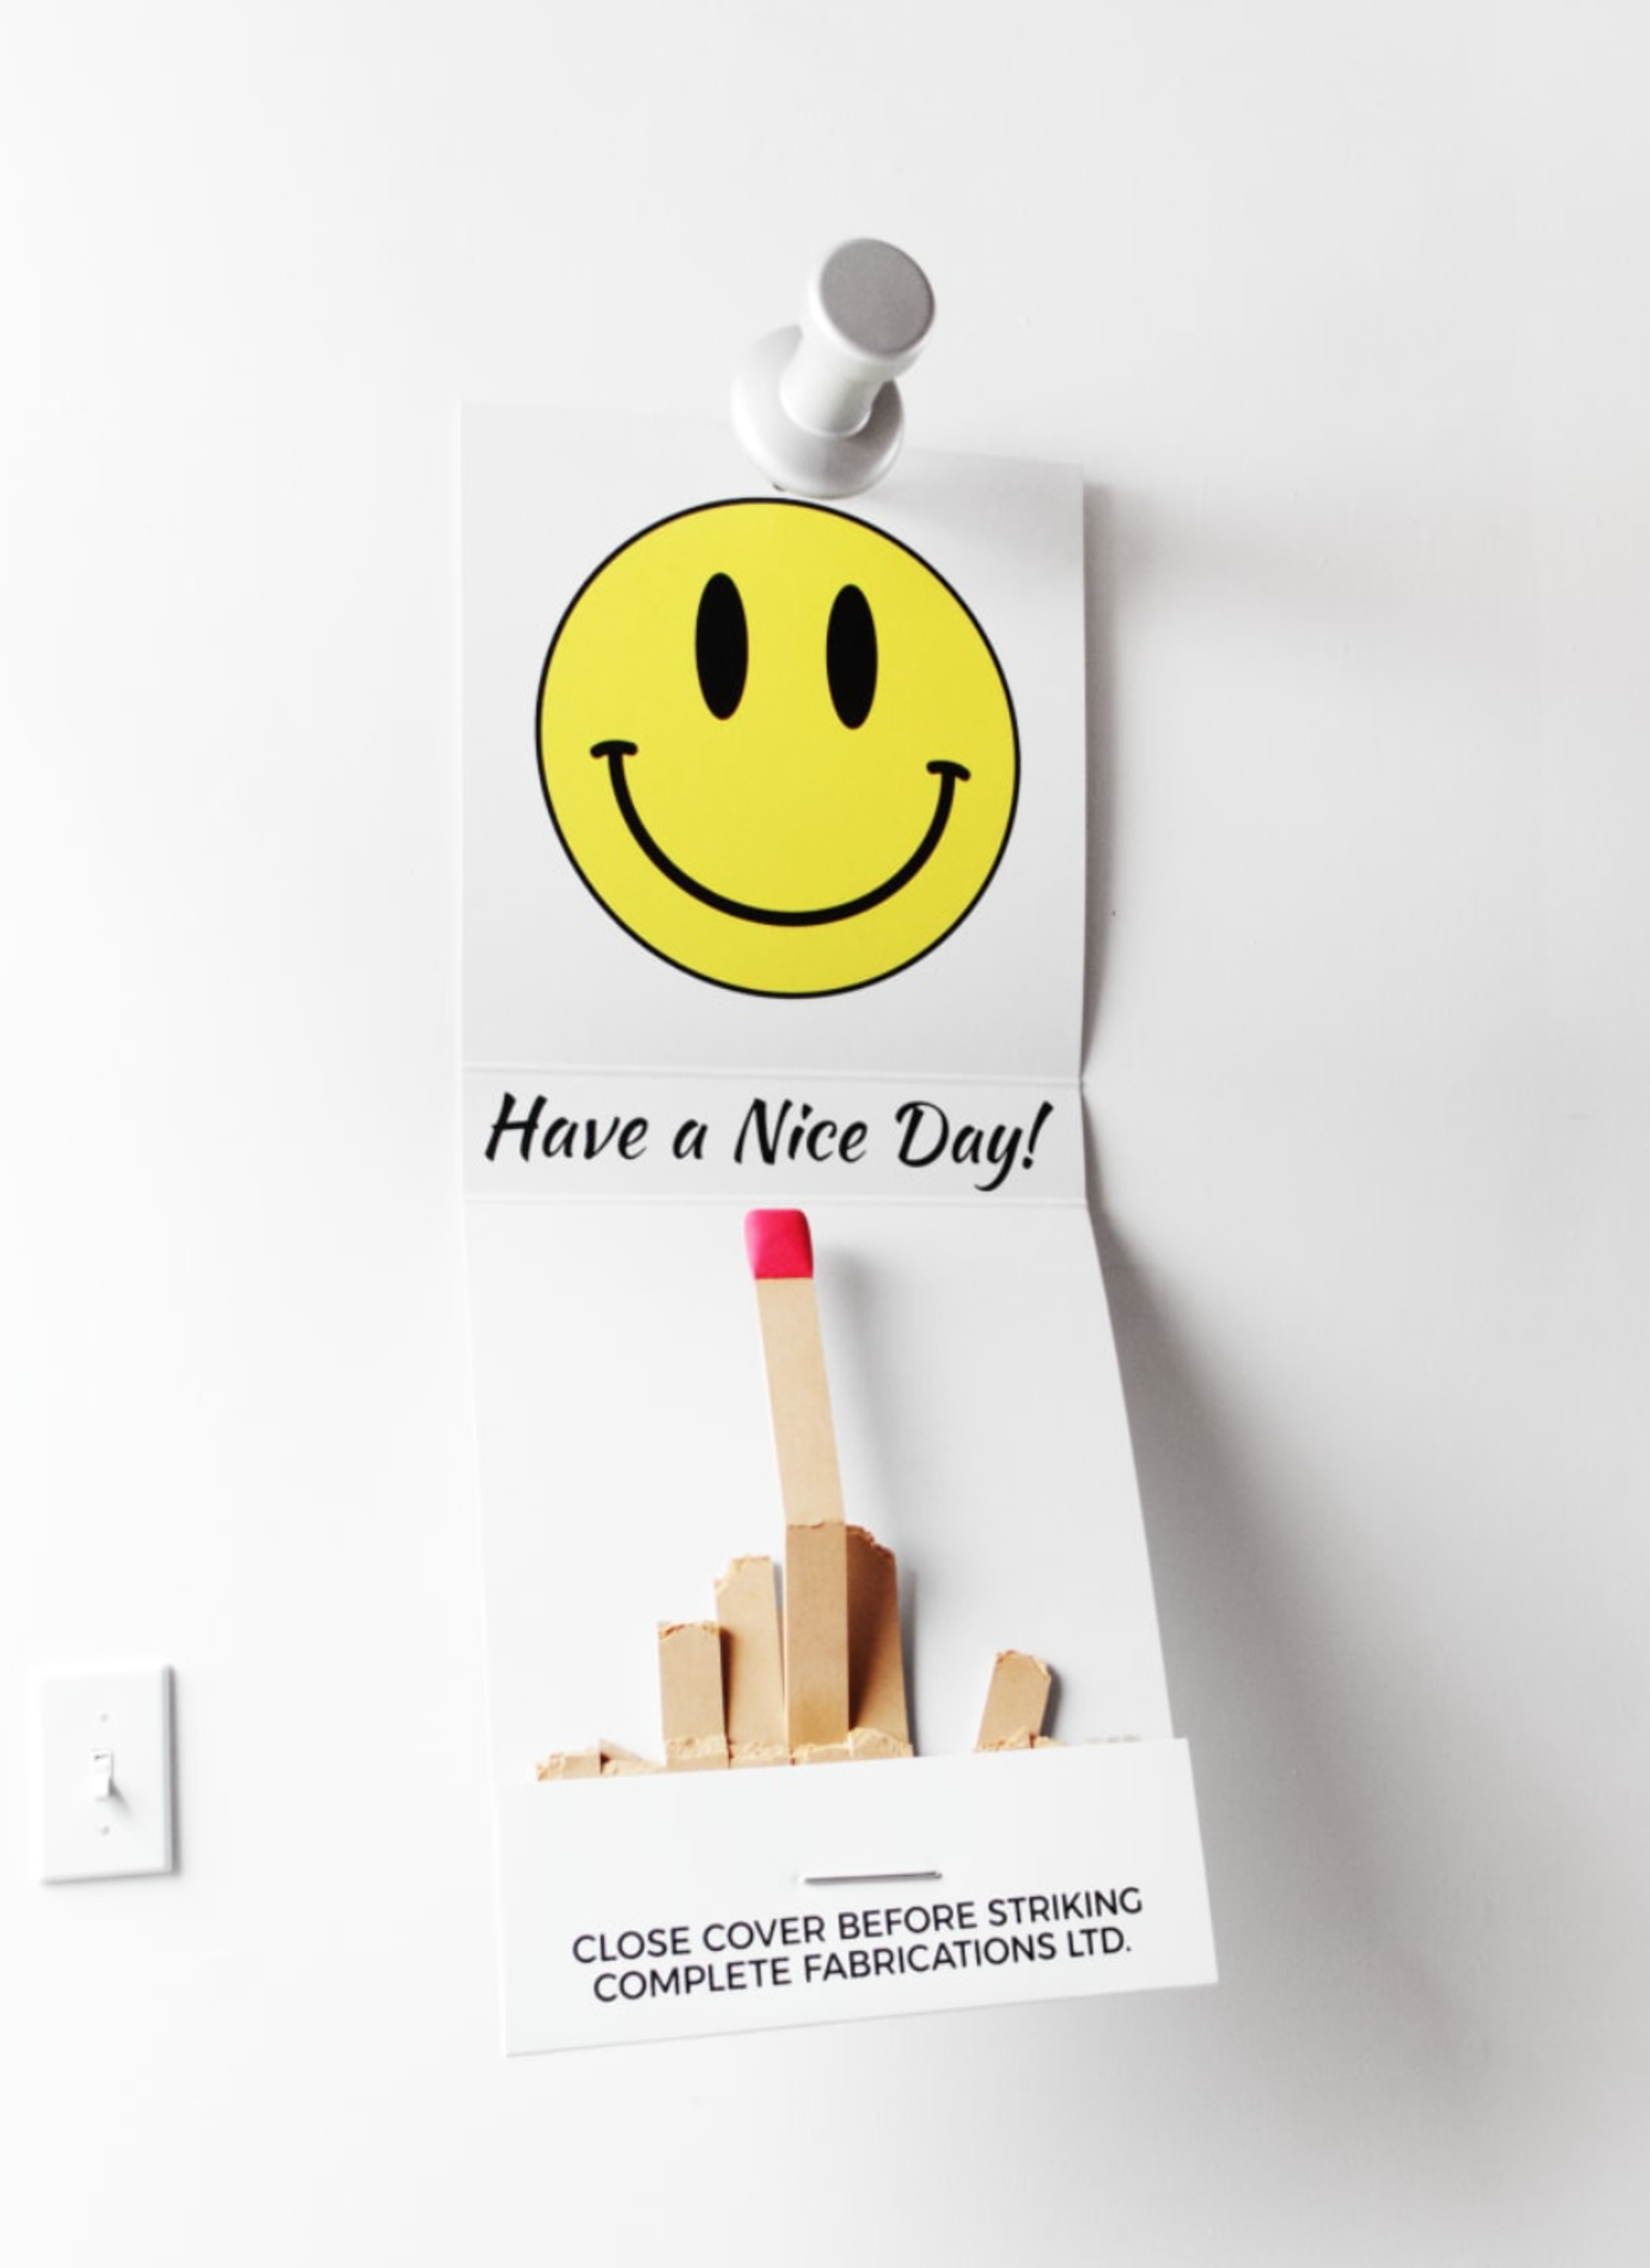 Have a Nice Day! by Miles Jaffe